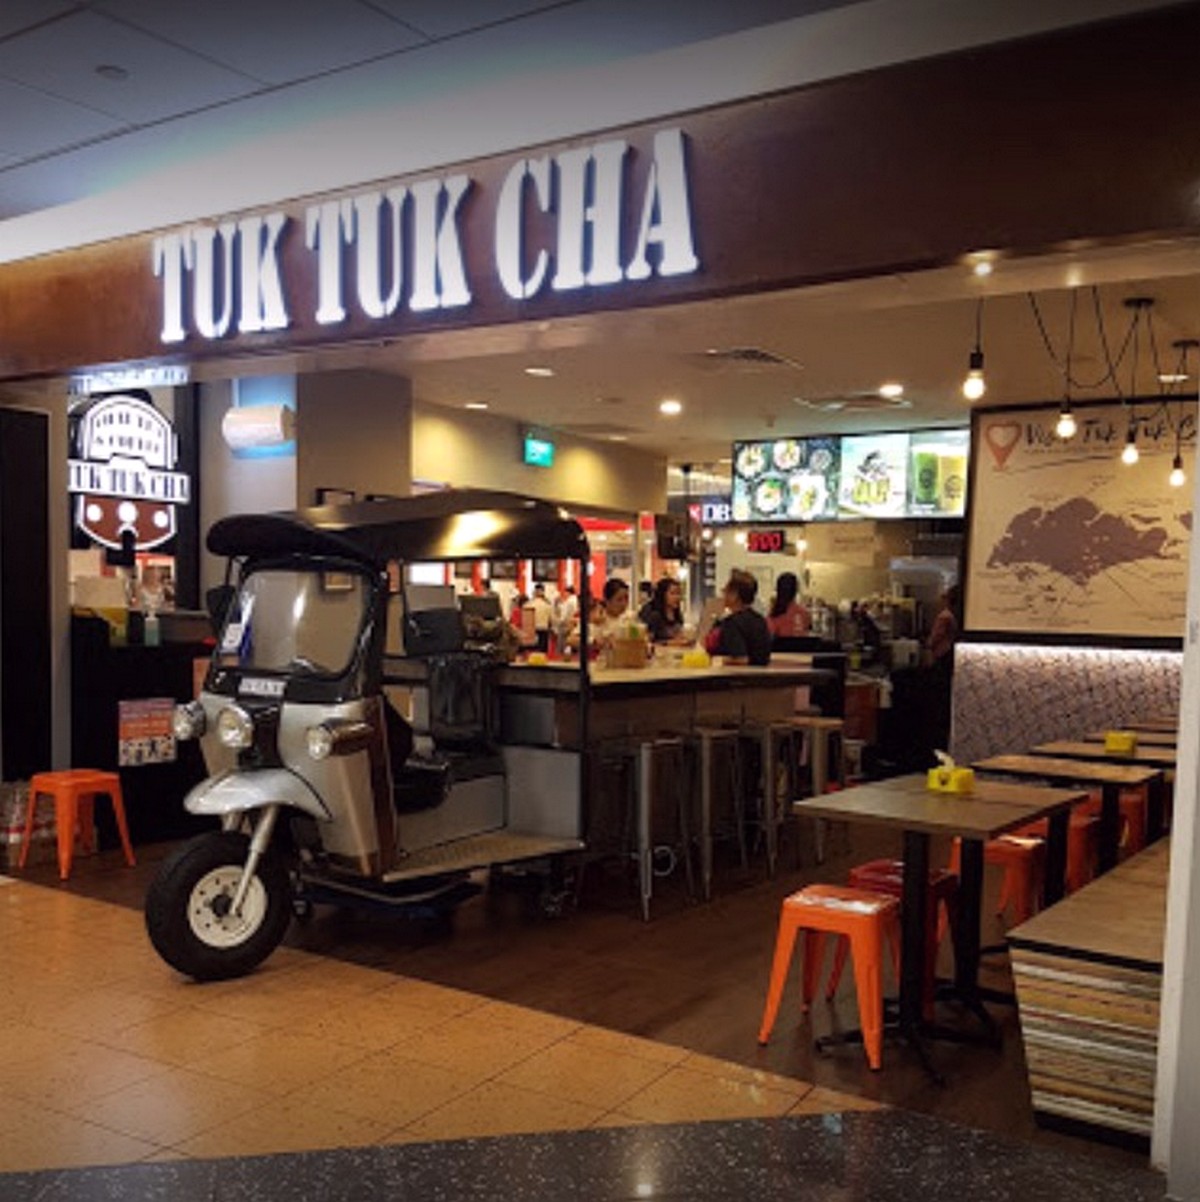 HarbourFront-Centre-tuk-tuk-cha-Google-Search Now till 4 Jun 2021: Tuk Tuk Cha 1-FOR-1 Thai Milk Tea Promo All-Day at 3 selected outlets in Singapore